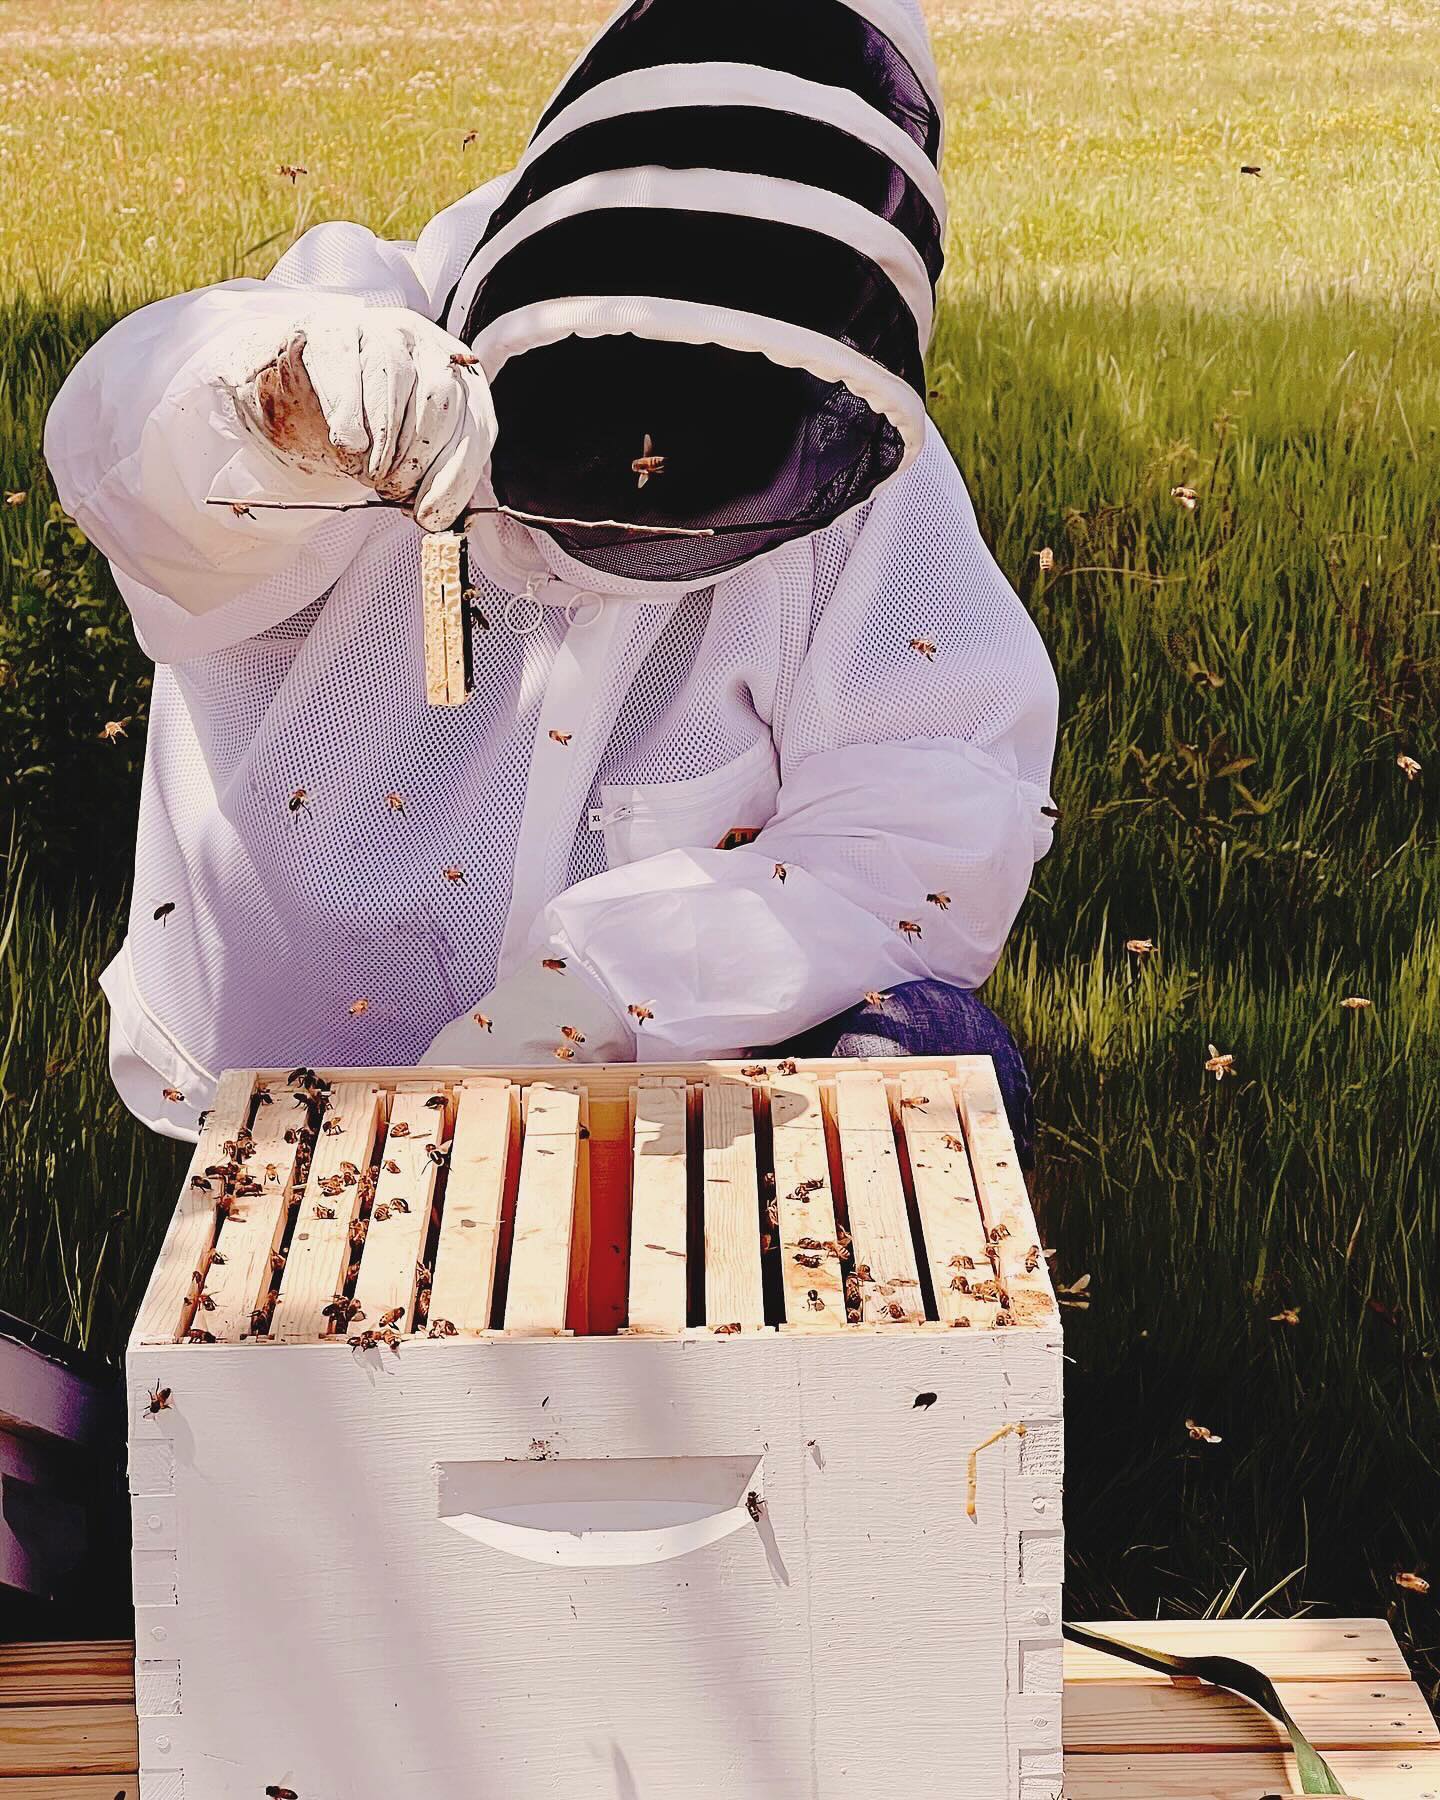 Hives begin with a package of about 3,000 bees shipped through the post office. (Talk about “handling with care”.) Those